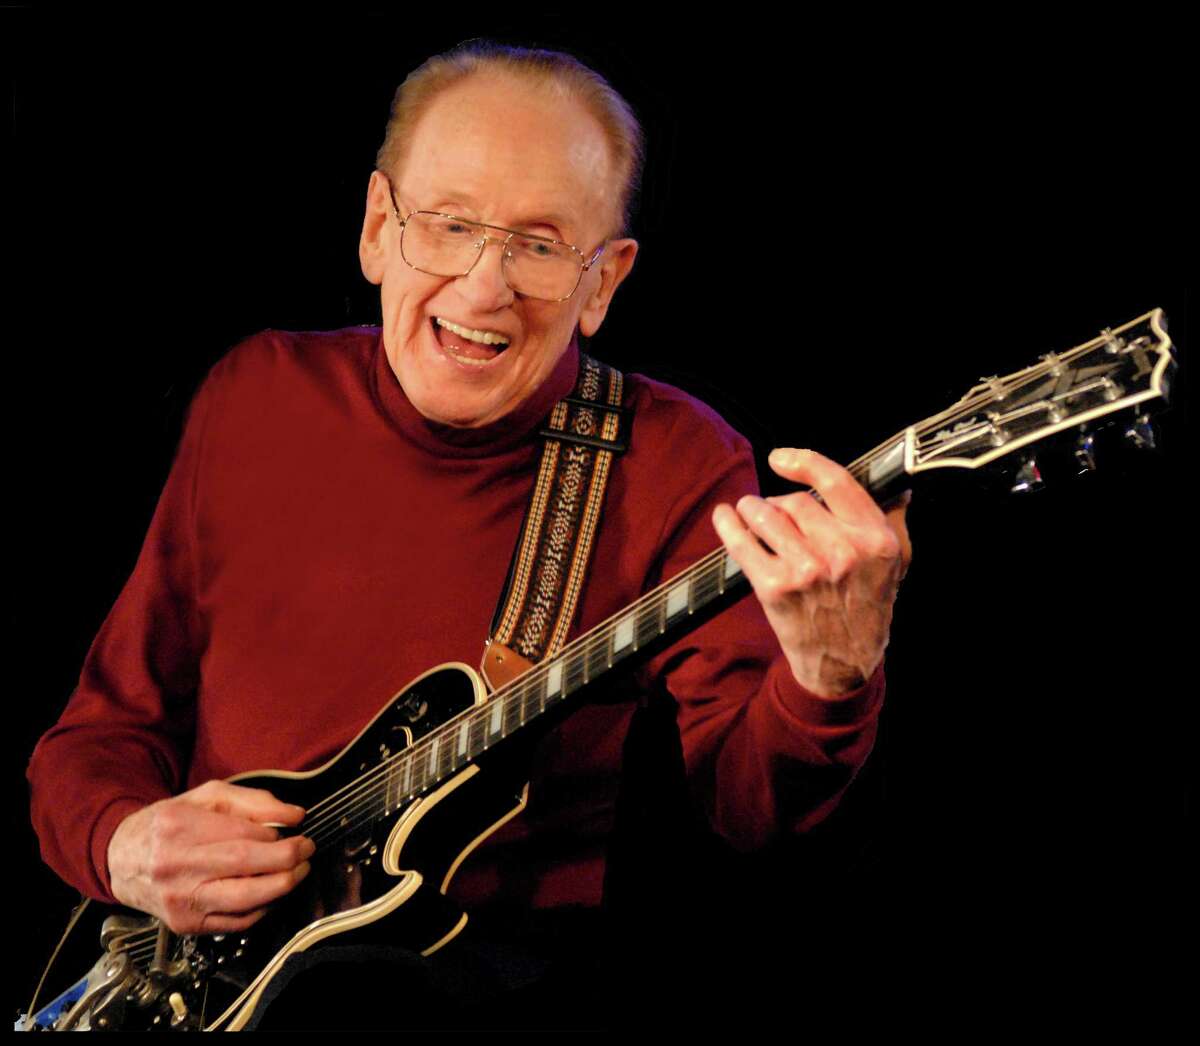 Photo of Les Paul in 2009. Photo from the Les Paul Foundation